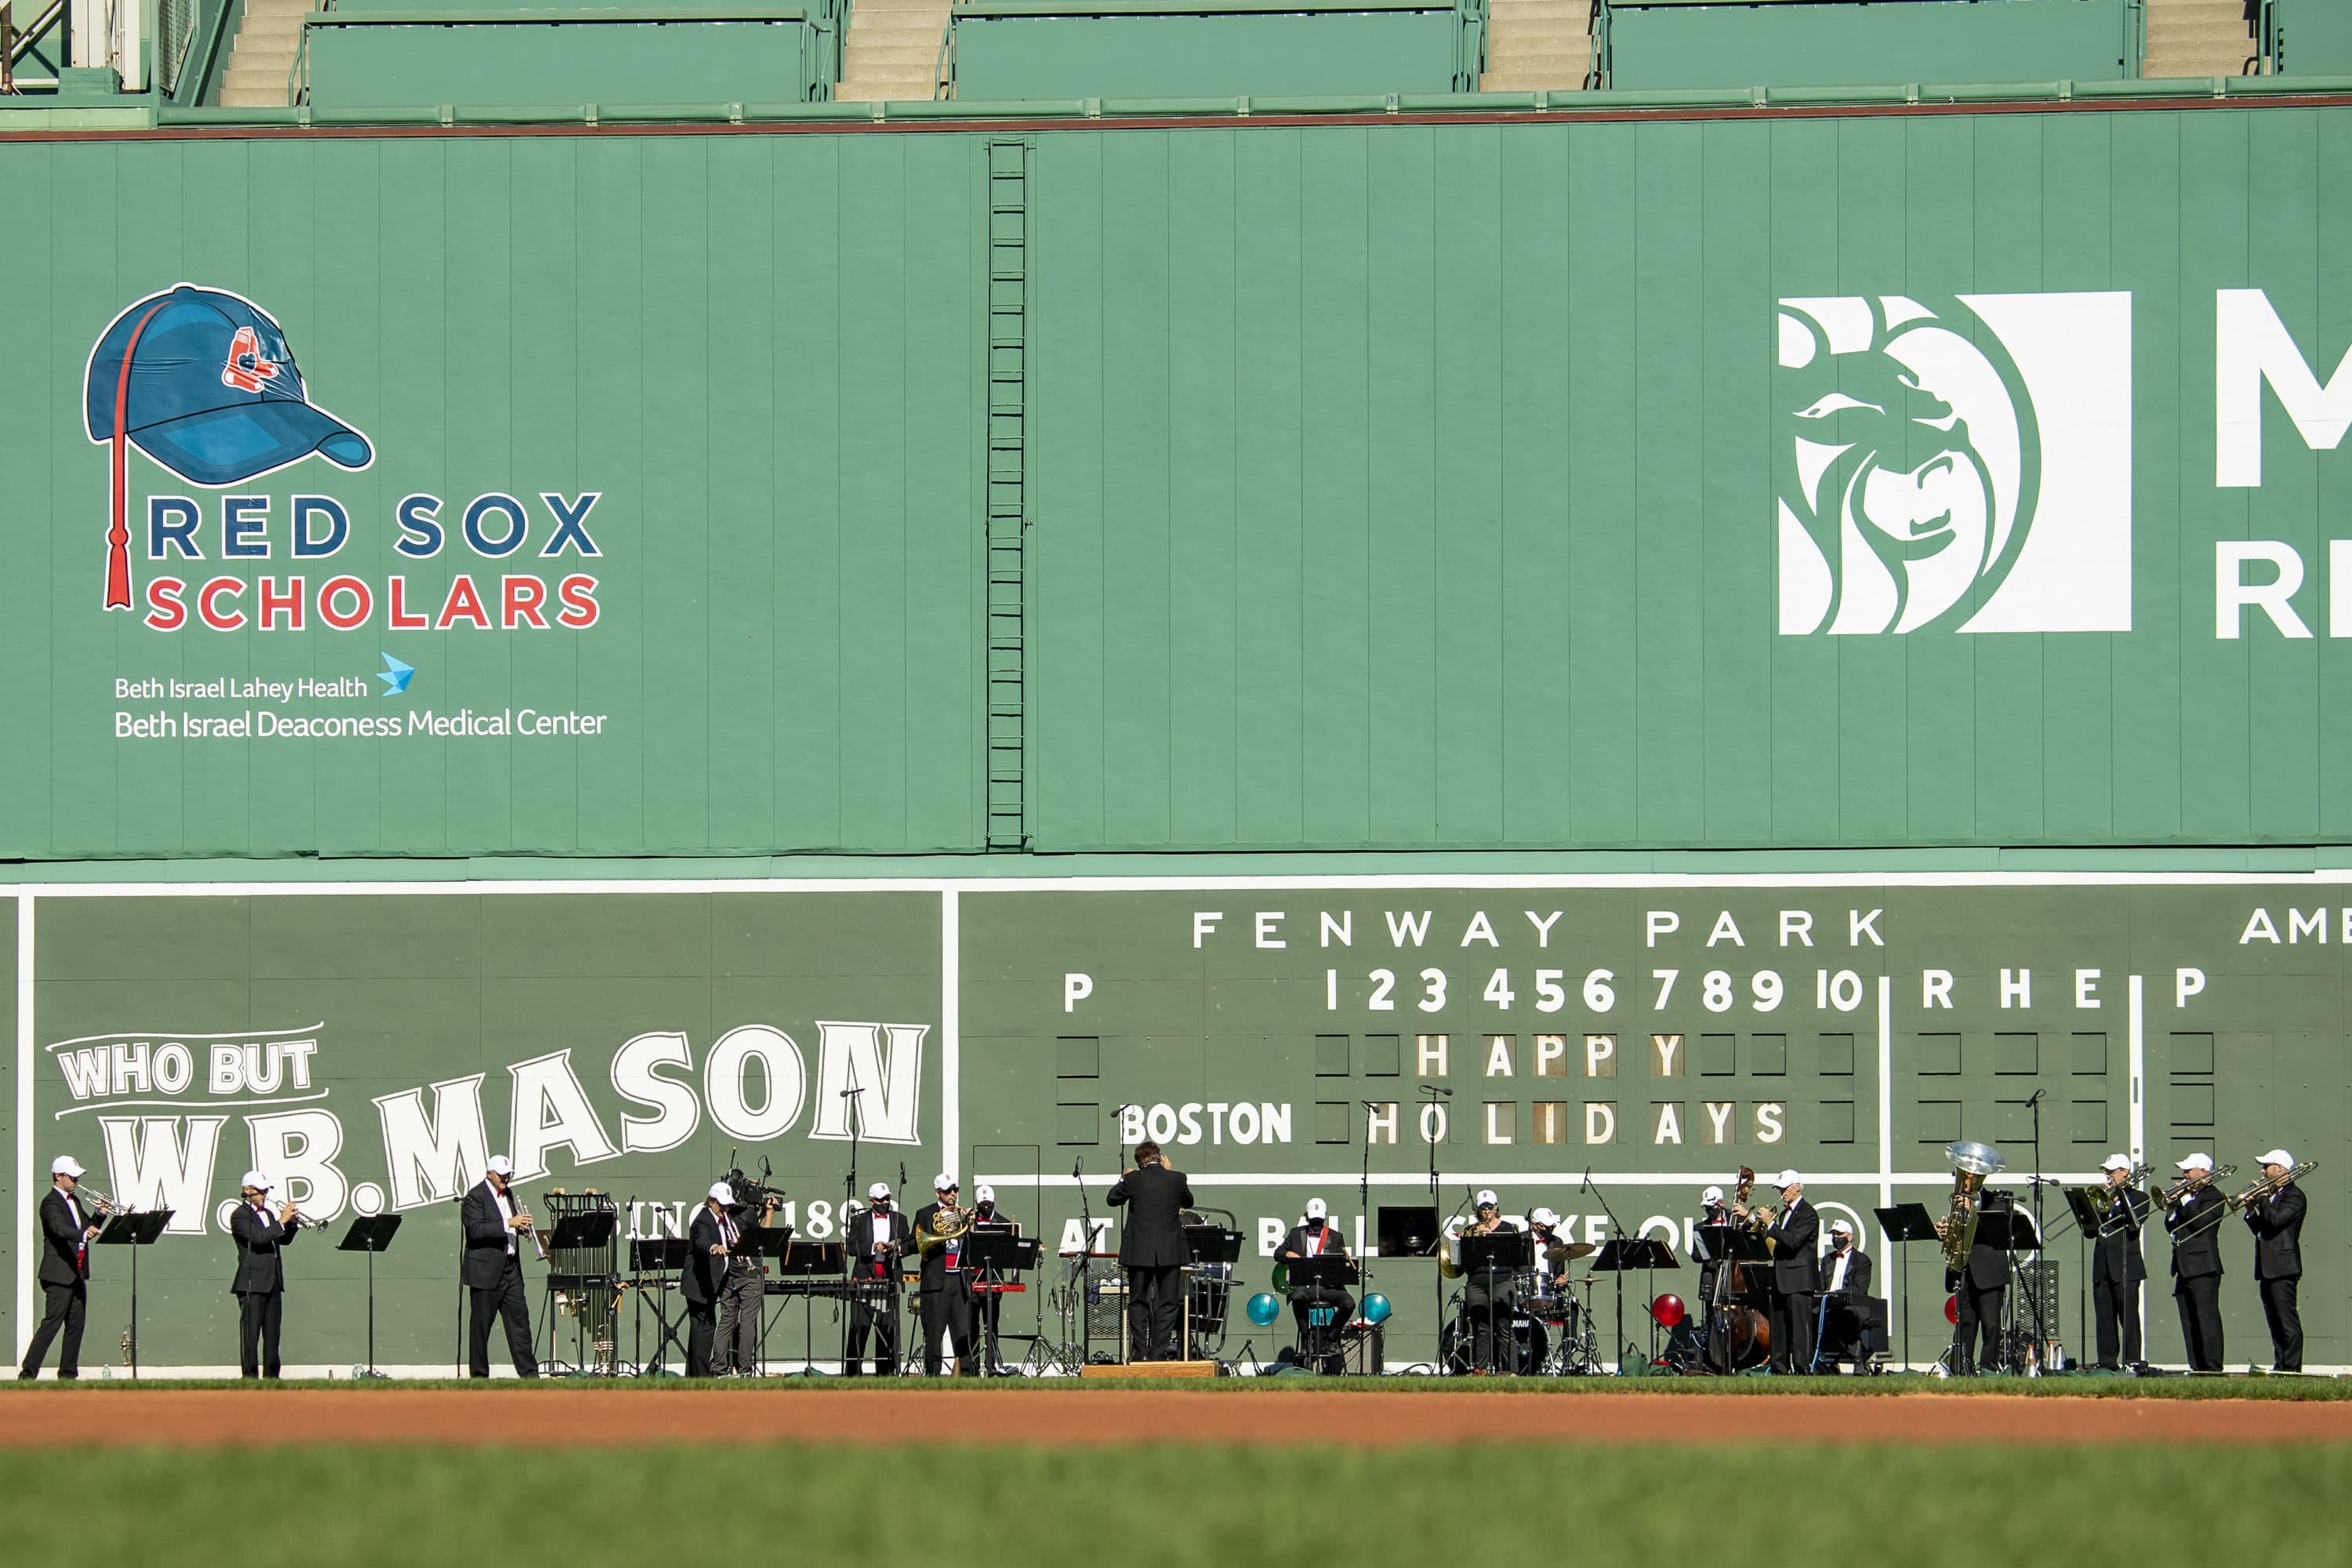 Boston Pops Go To Fenway To Bring Their Big Holiday Concert To The